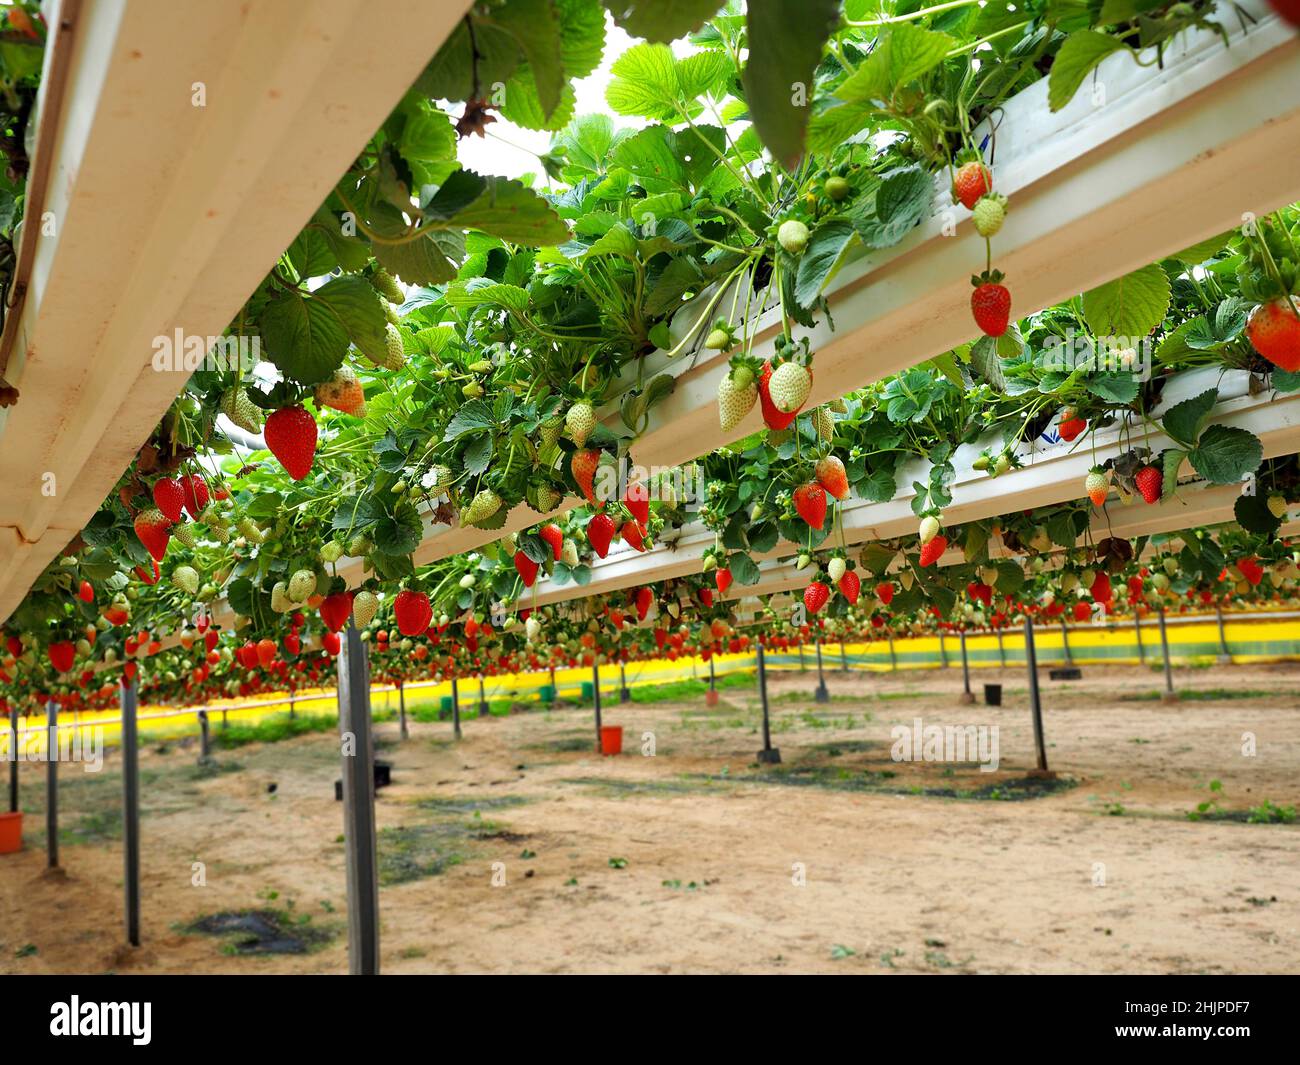 The hanging gardens of strawberry. The modern Israeli technology of strawberiies cultivation in greenhouses. Stock Photo